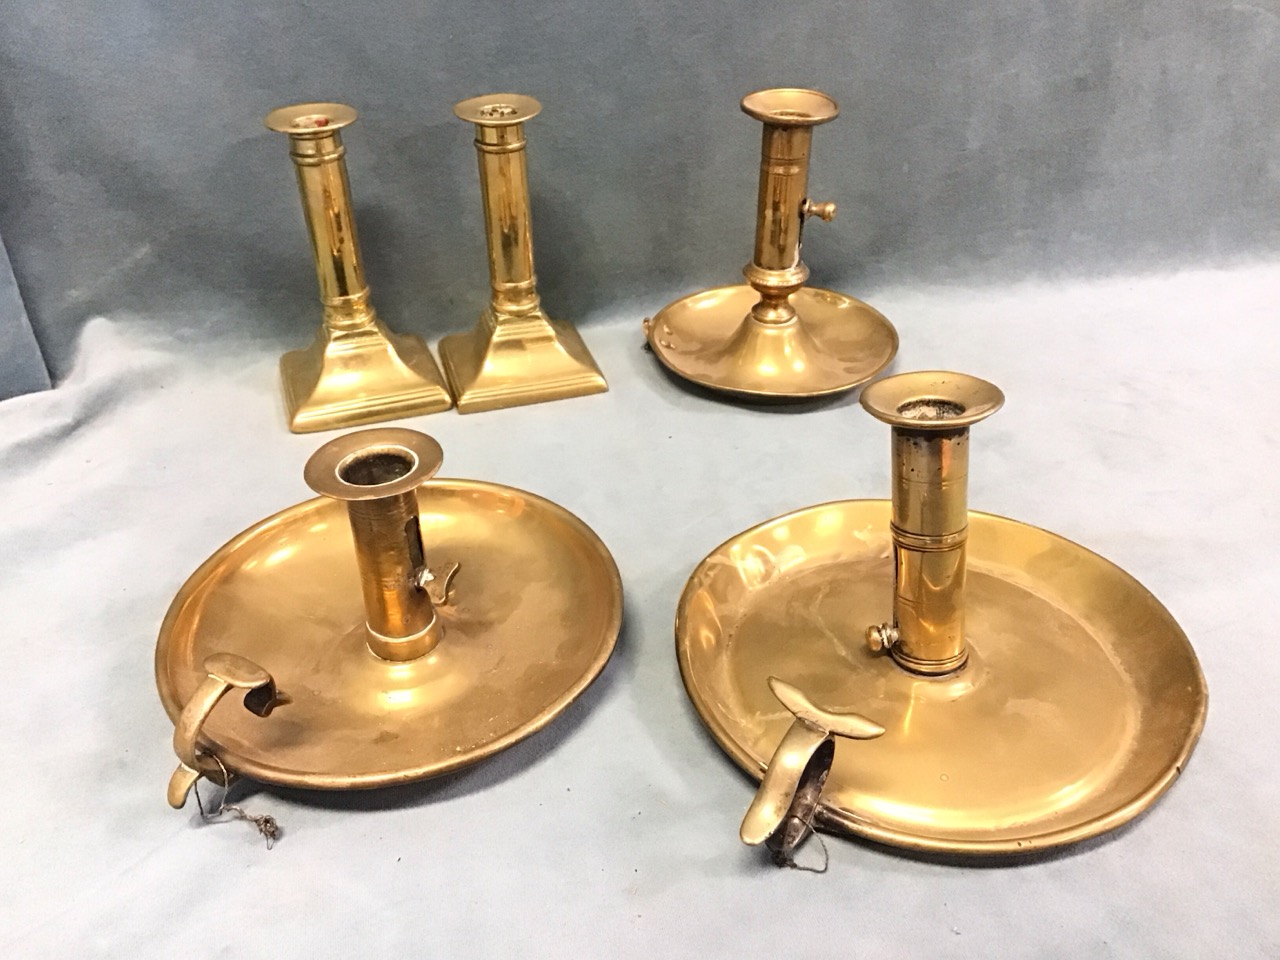 A pair of Georgian brass columnar candlesticks on flared square bases - 5.25in; and three nineteenth